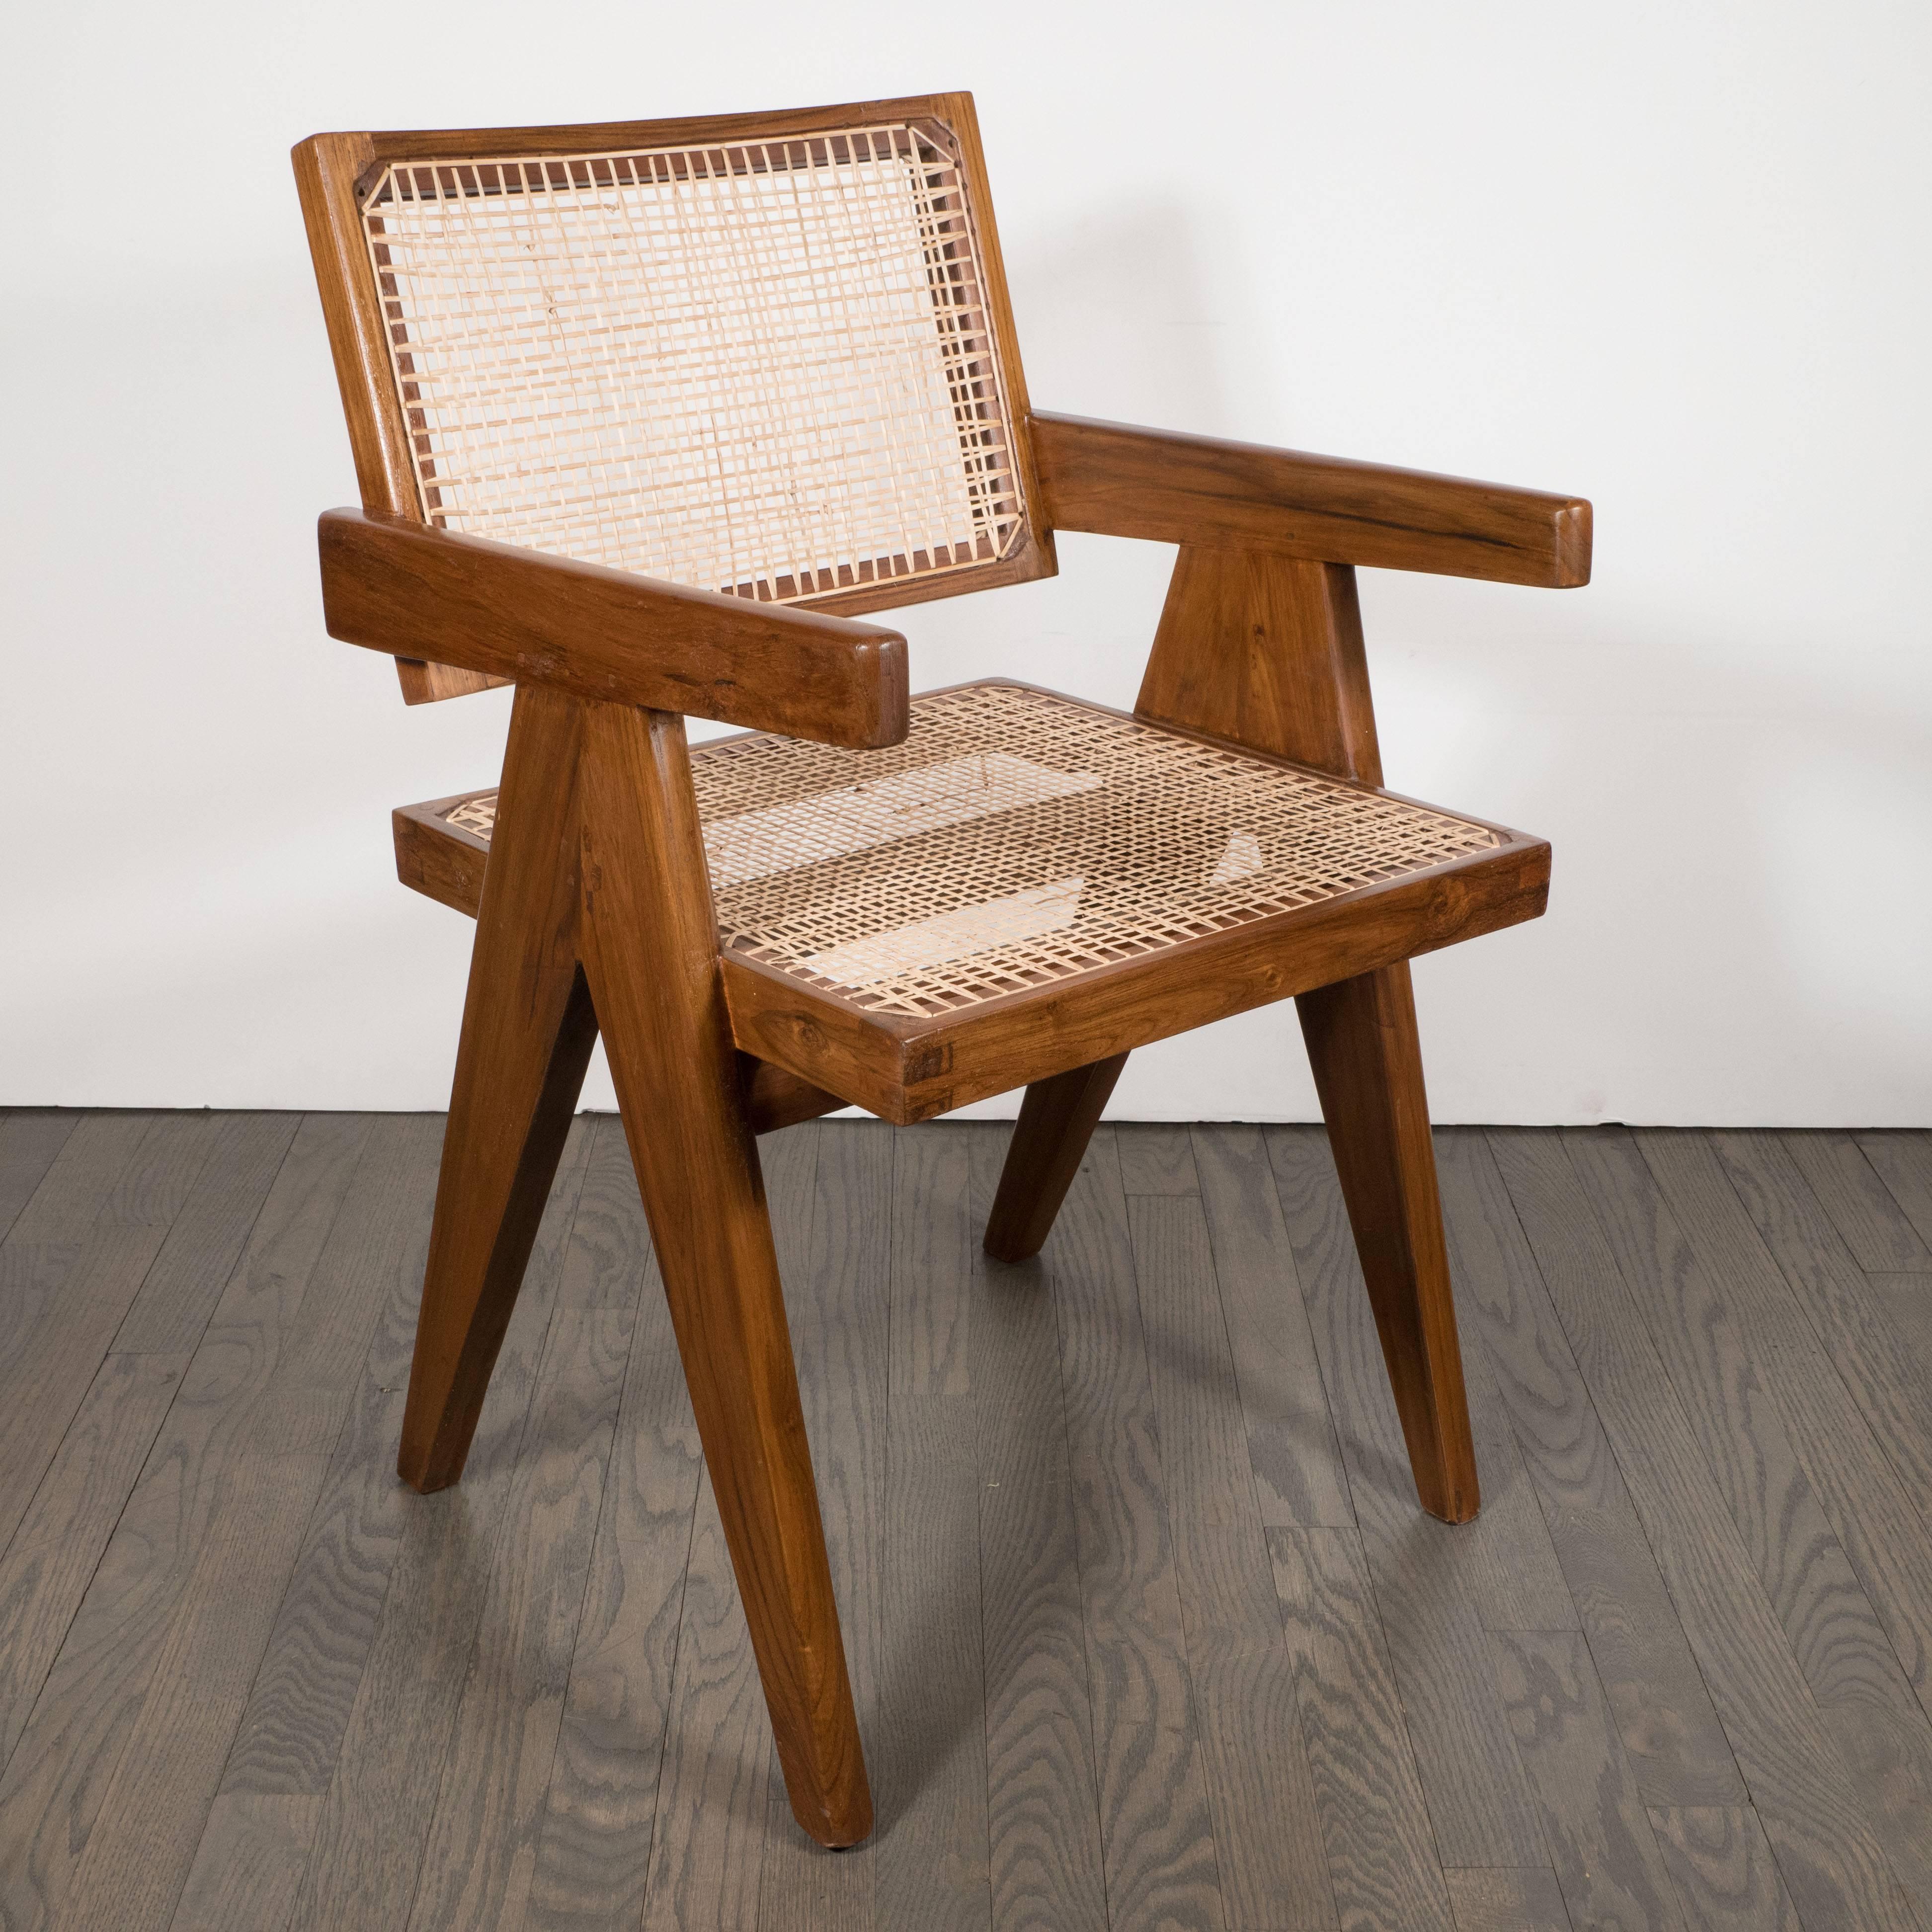 Pair of Armchairs in Teak, Caning and Upholstery by Pierre Jeanneret 2